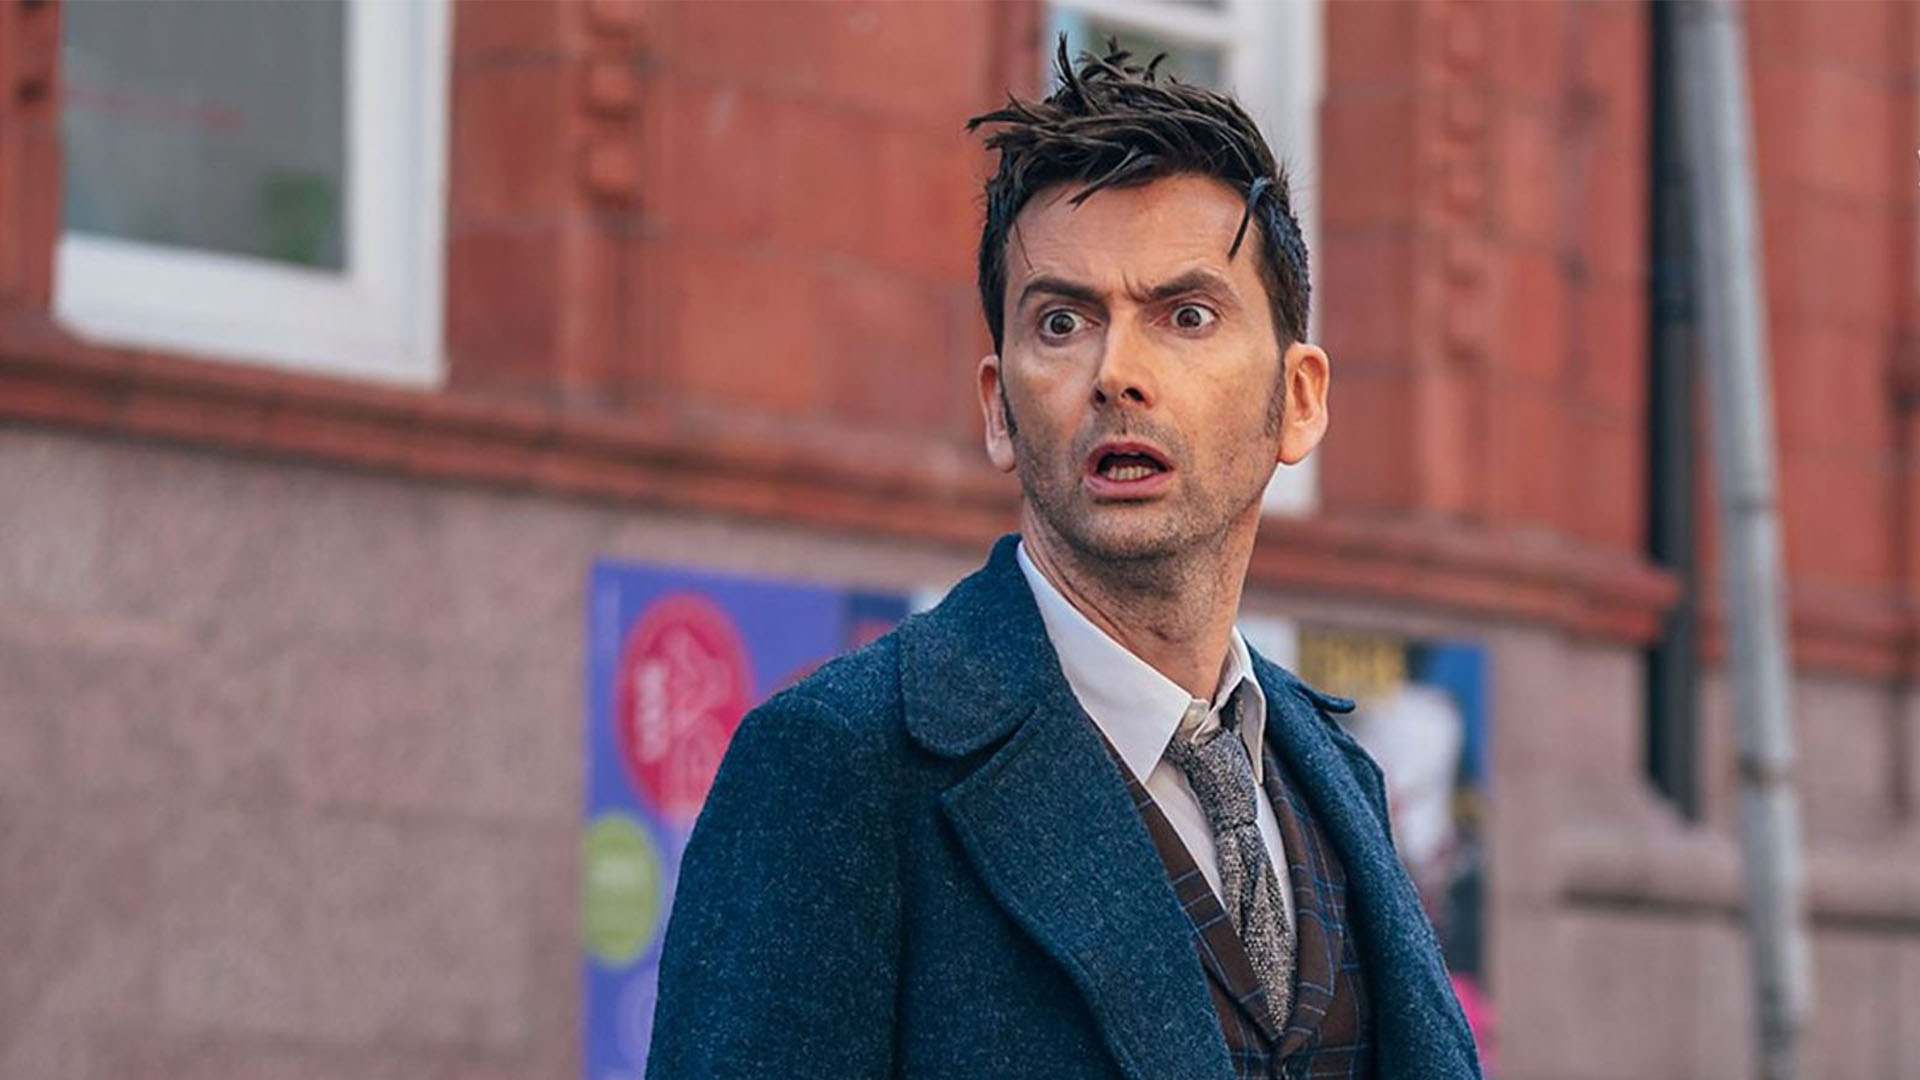 David Tennant addresses whether he would return to Doctor Who again